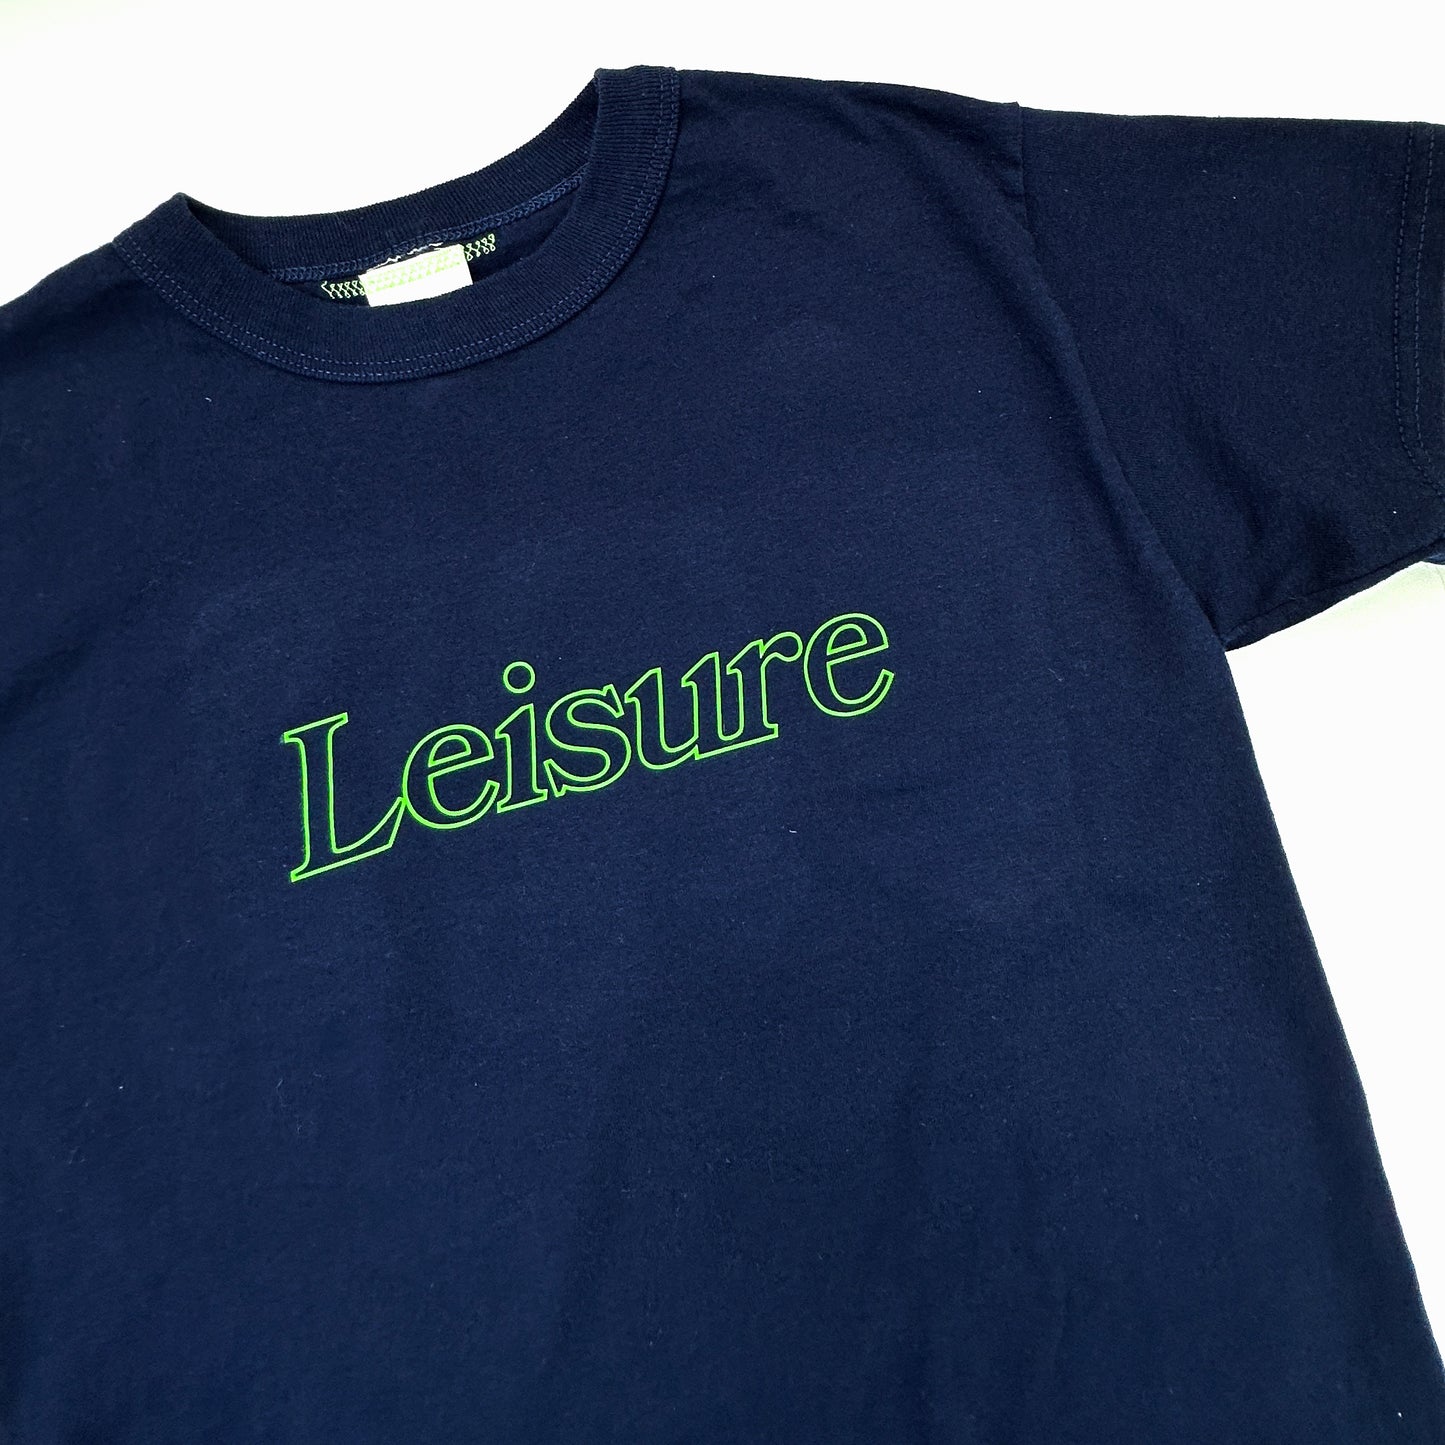 LEISURE - Navy Outline Logo Tee - Size Adult S